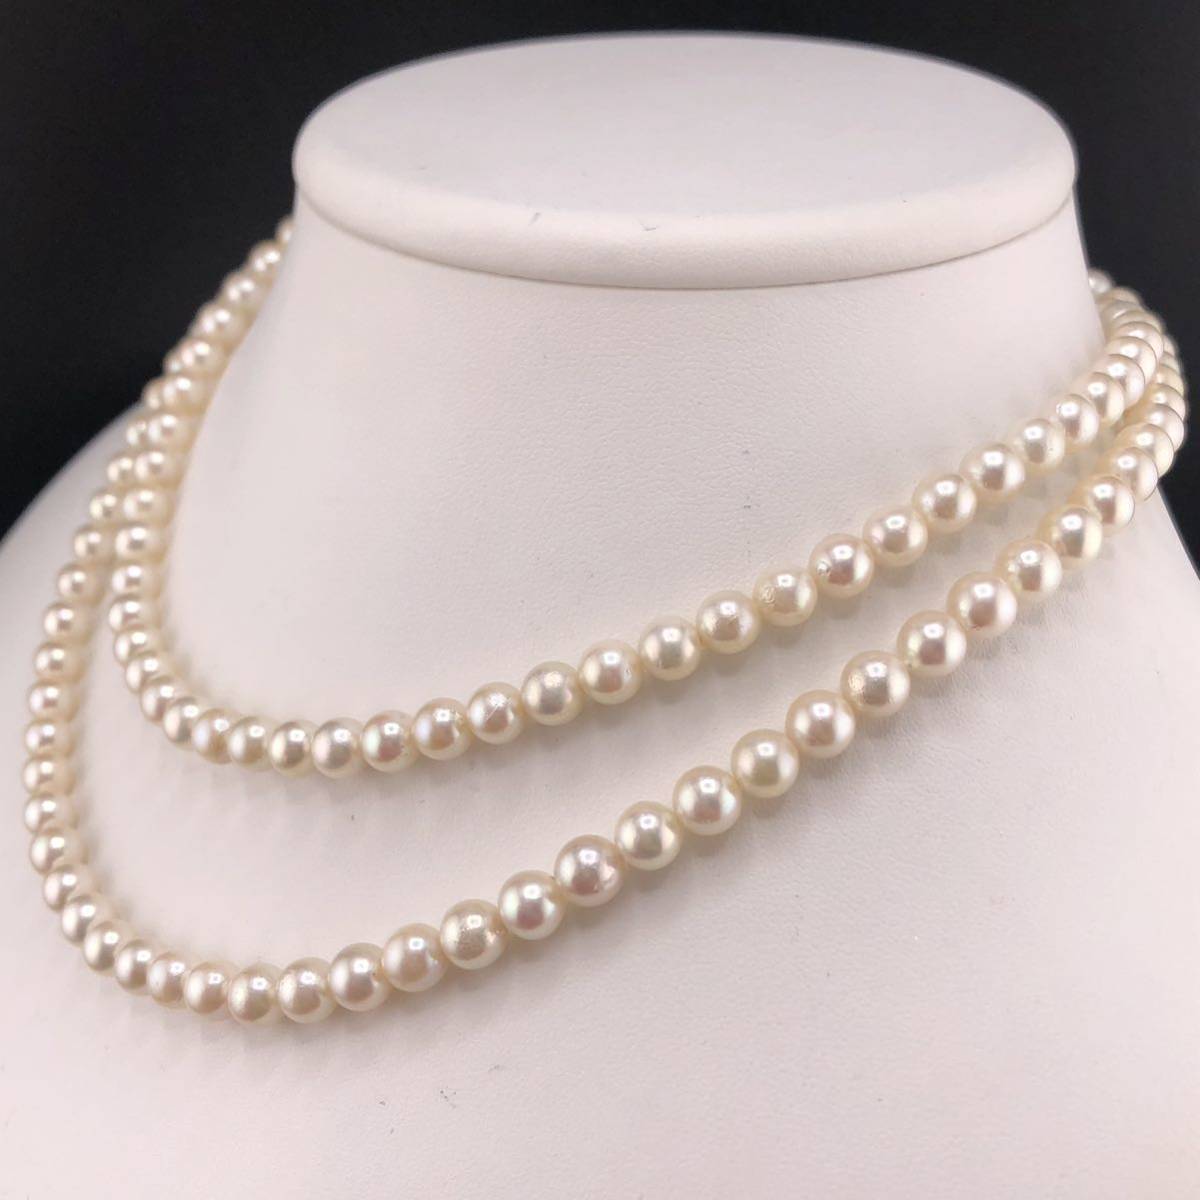 E02-5634 ☆アコヤロングパールネックレス 6.0mm~6.5mm 約82cm 50g ( アコヤ真珠 Pearl necklace SILVER )_画像2